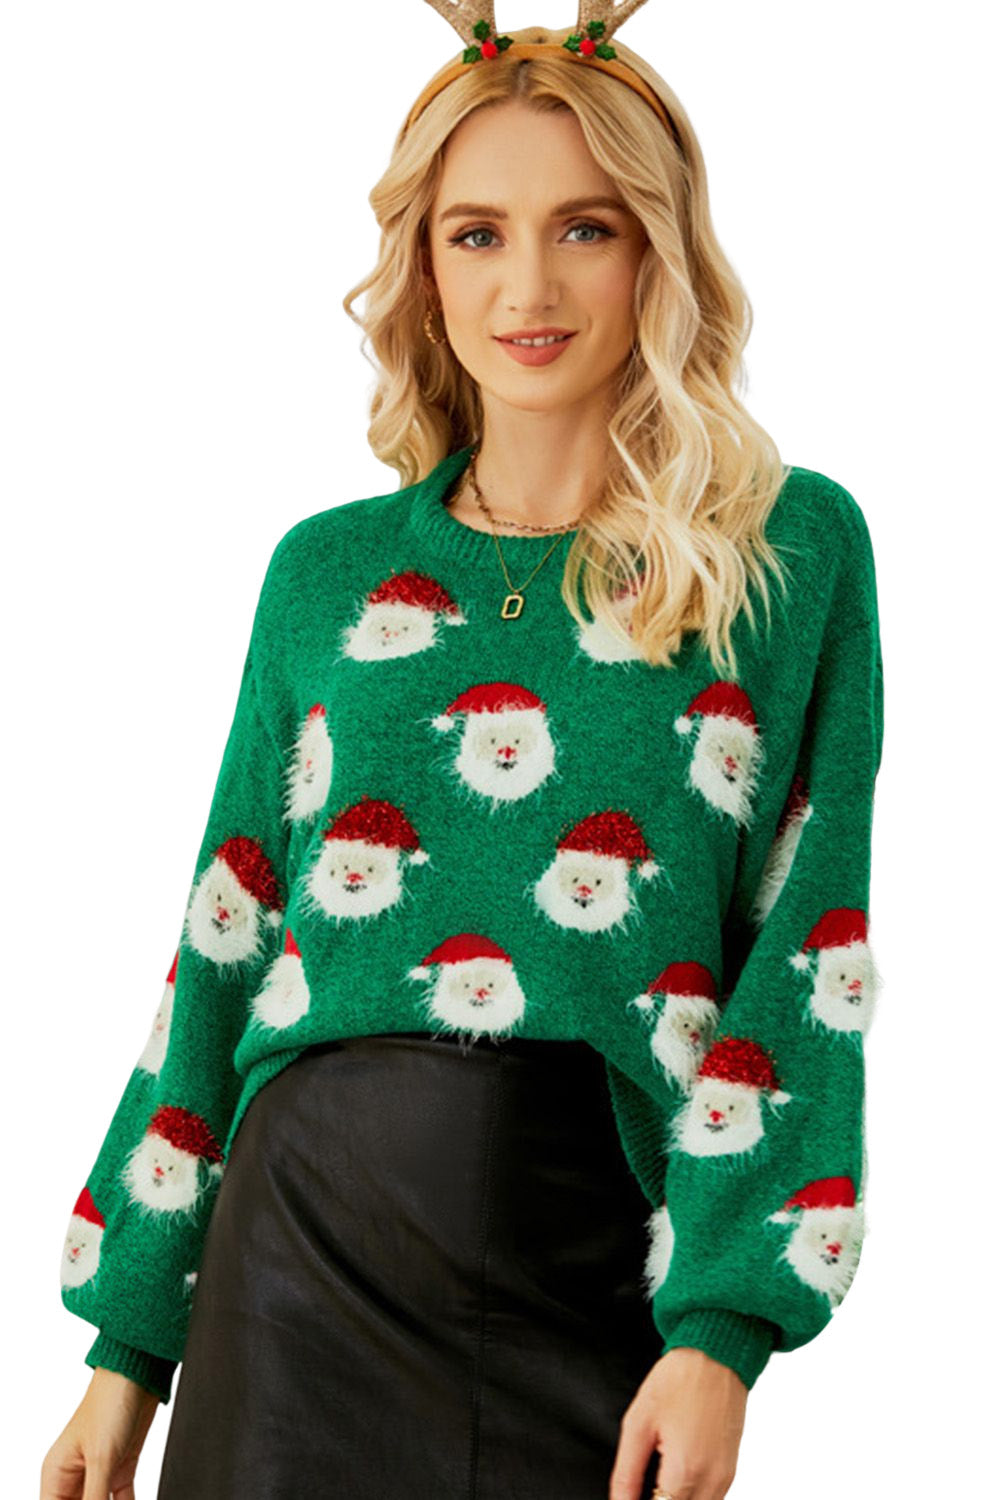 Green Christmas Santa Claus Pullover Sweater Sweaters & Cardigans JT's Designer Fashion